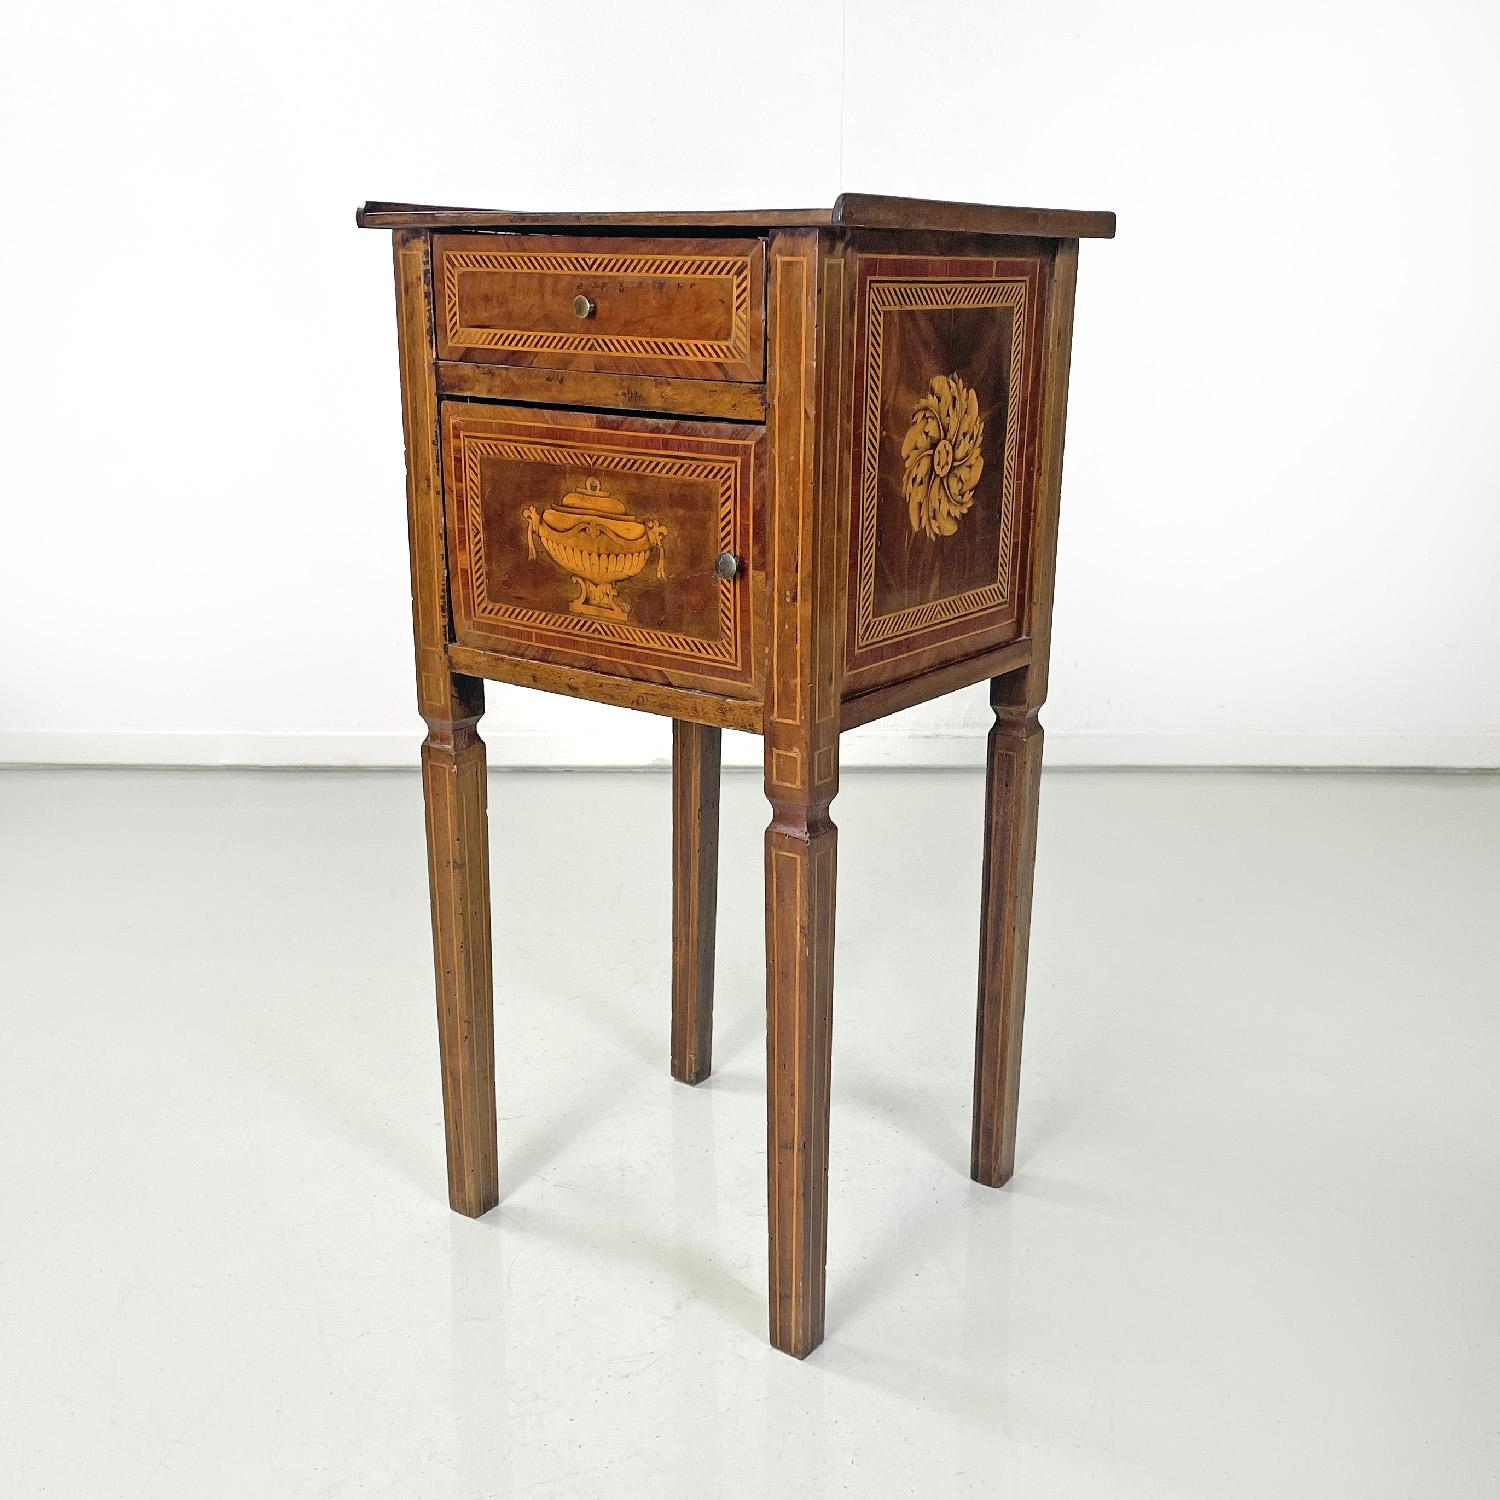 Mid-18th Century Italian antique wooden bedside tables with inlaid floral decorations, 1750s For Sale